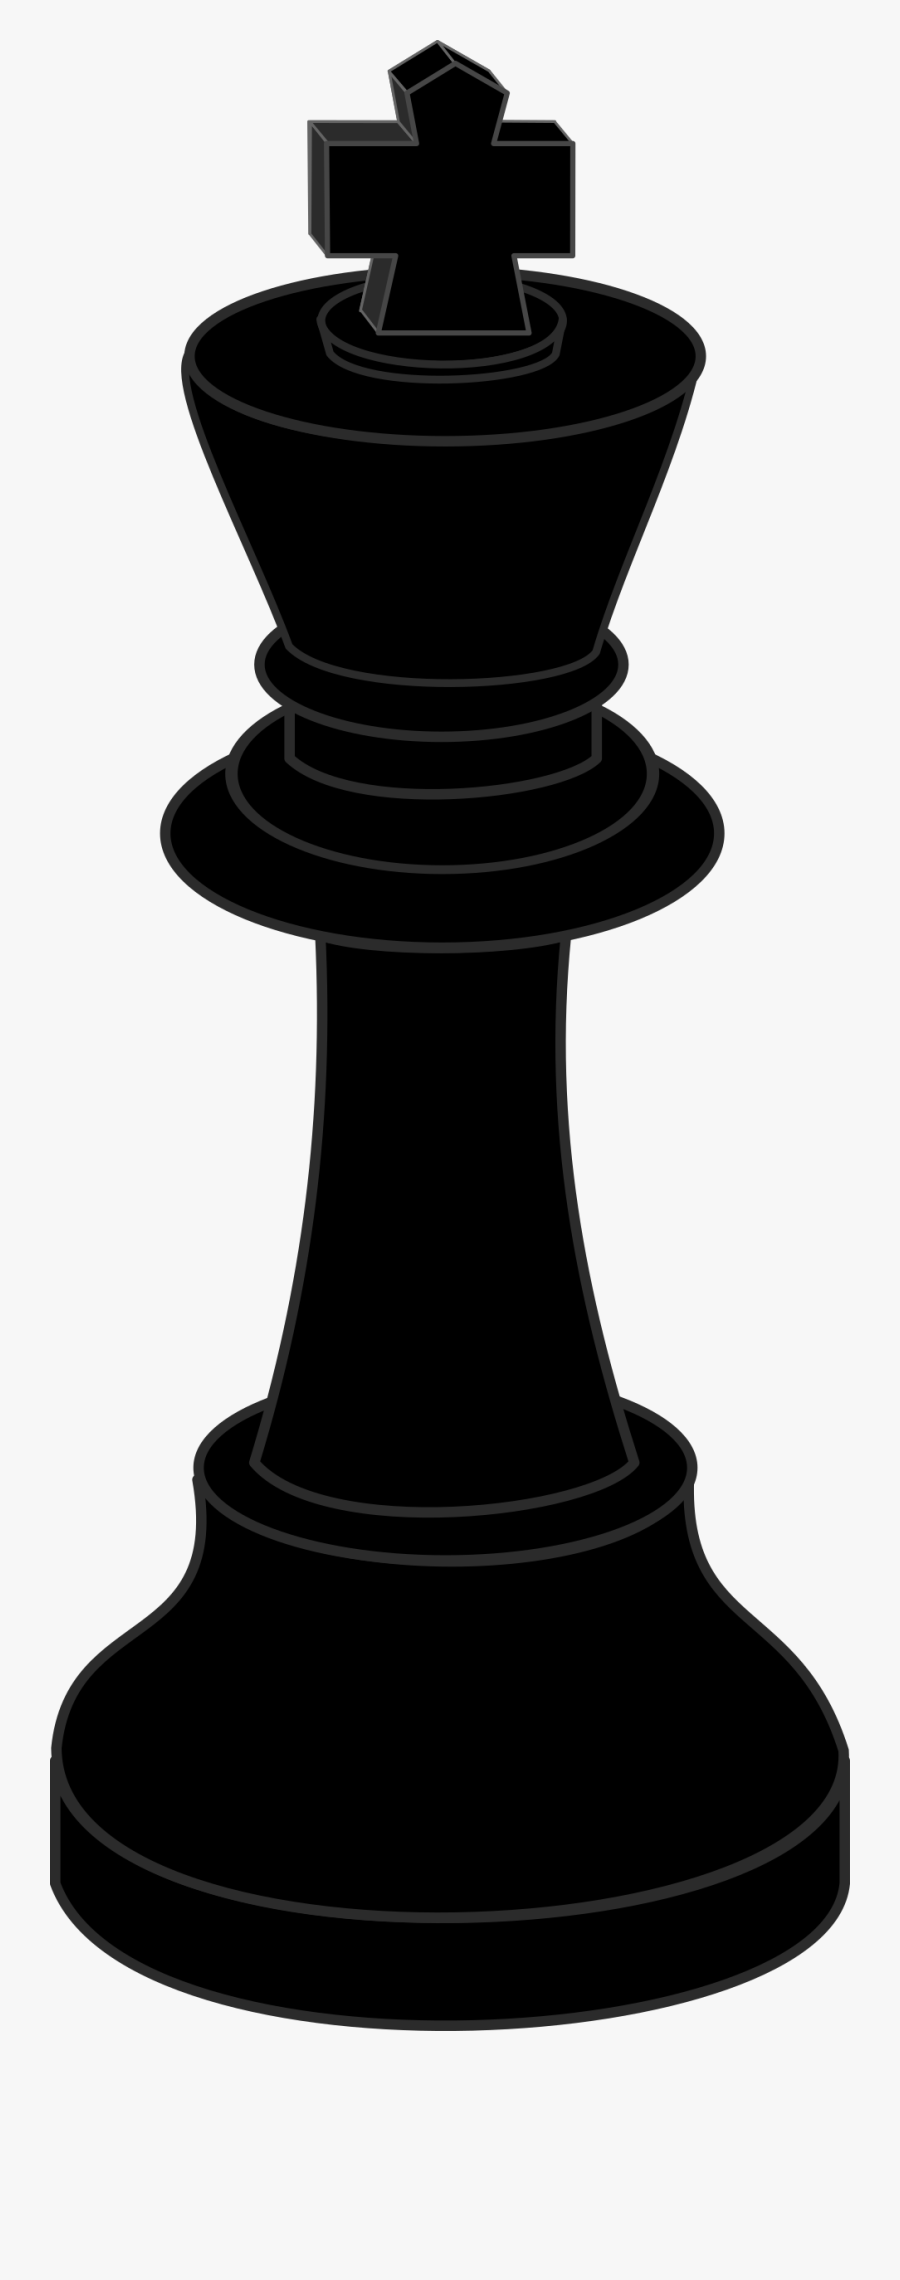 Black King Chess Piece Png, Transparent Clipart